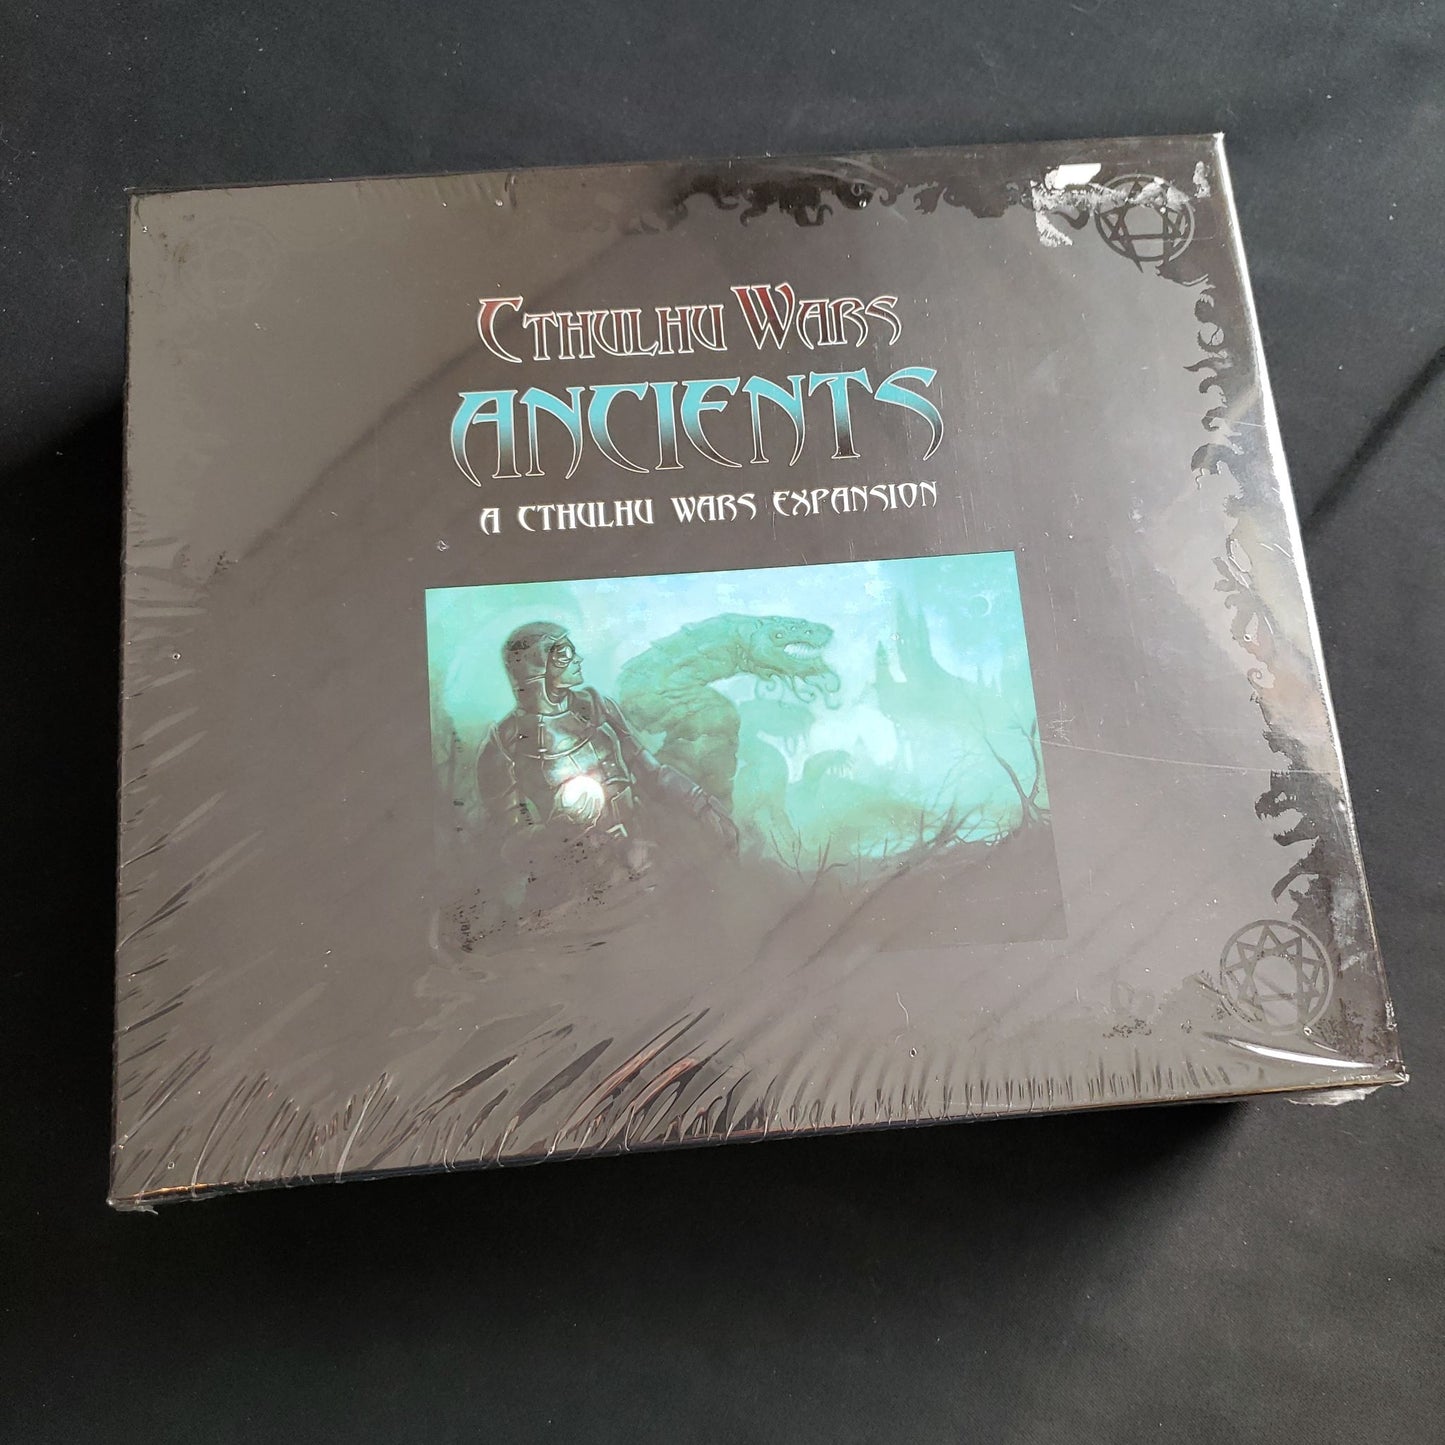 Image shows the front cover of the box of the Ancients expansion for the Cthulhu Wars board game